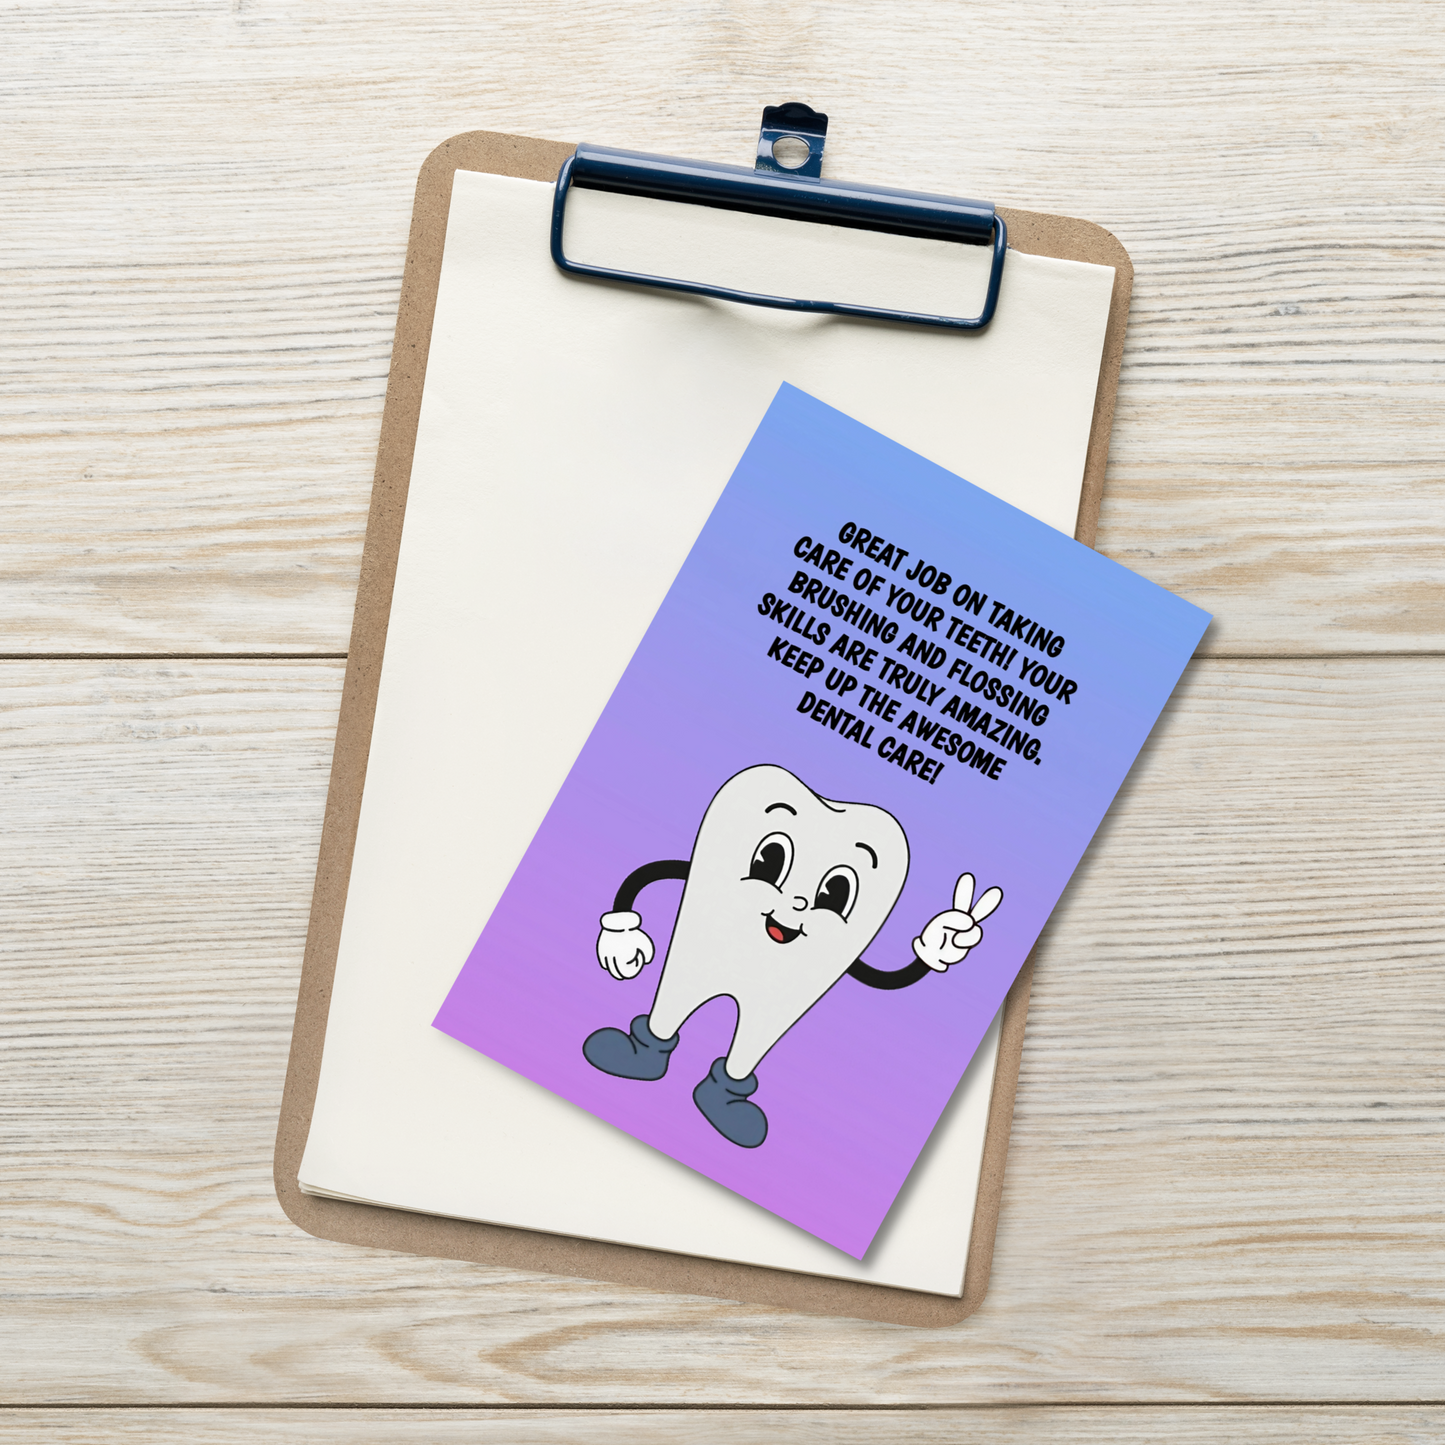 Dental Motivational & Reward Cards- Great Job On Taking Care Of Your Teeth!